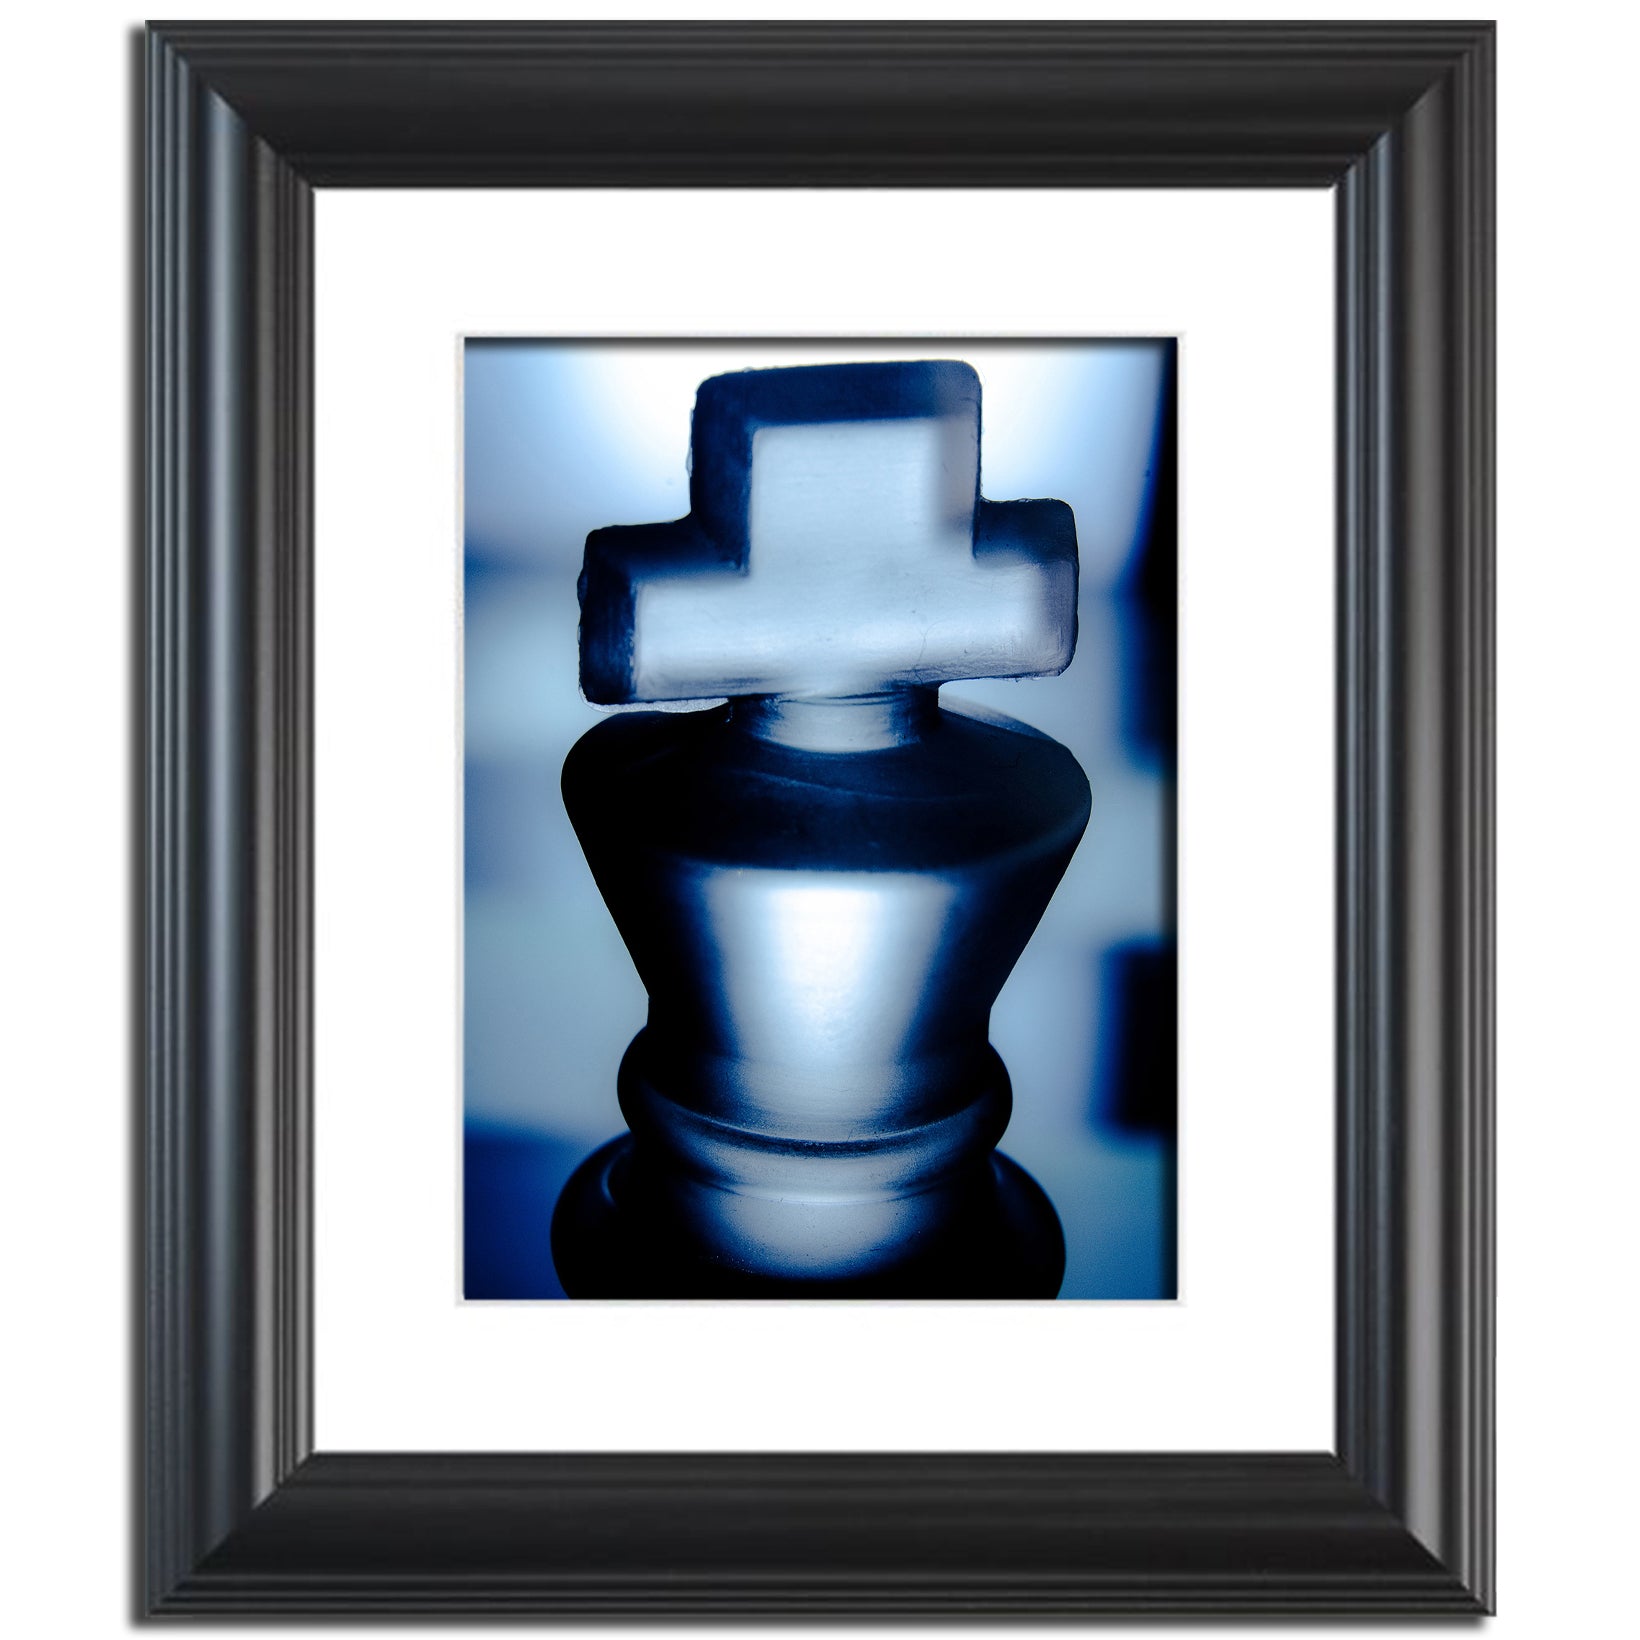 Heads of Kings Blue Abstract Photo Fine Art Canvas & Unframed Wall Art Prints  - PIPAFINEART